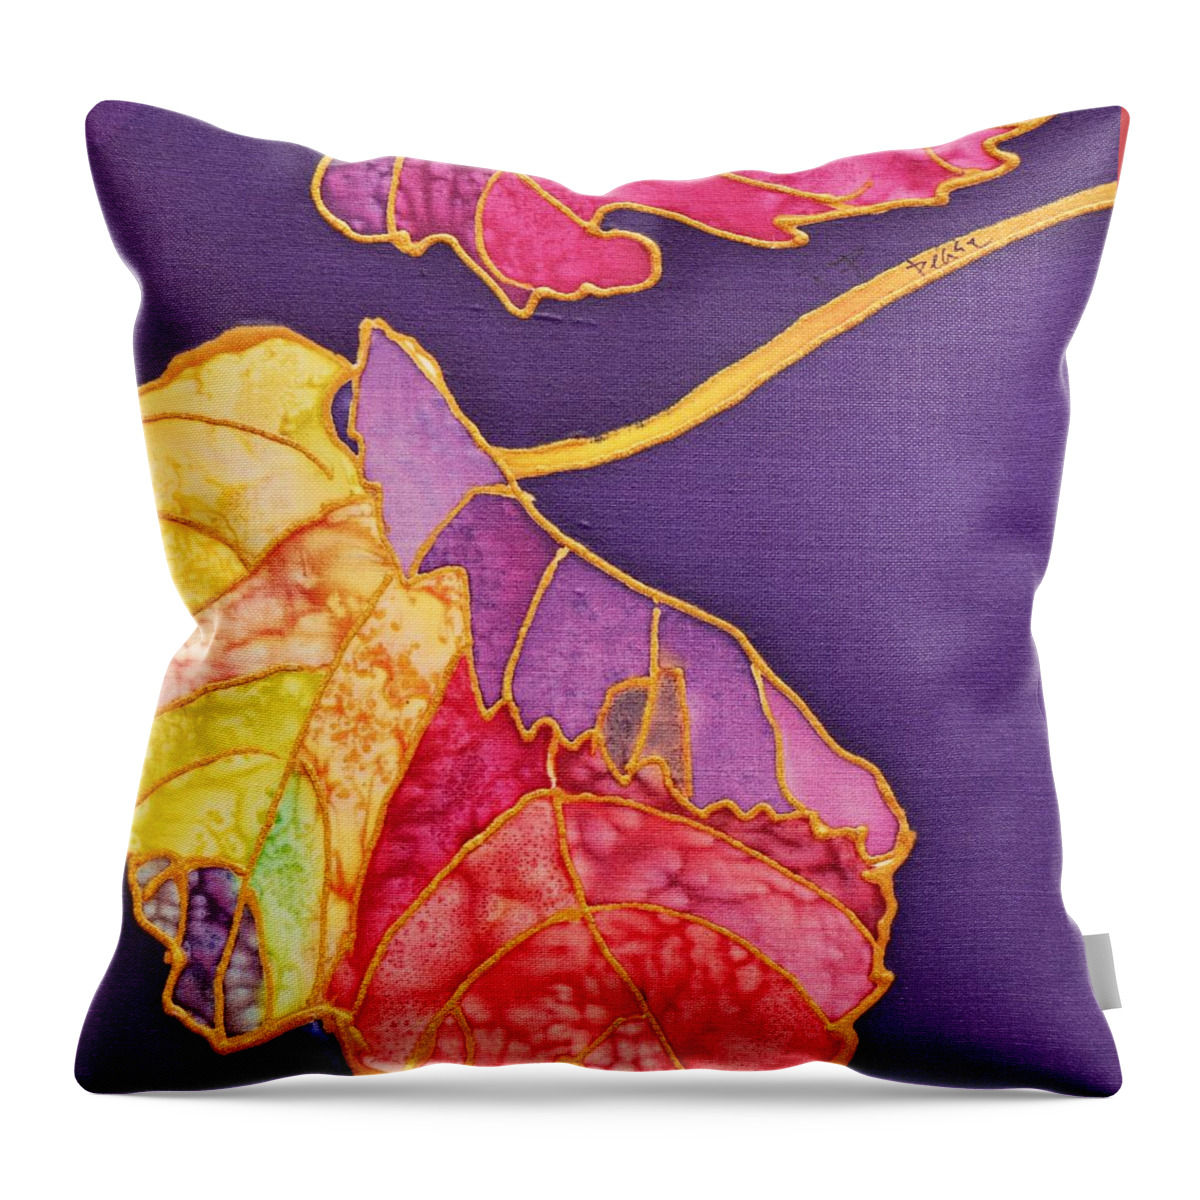  Throw Pillow featuring the painting Grape Leaves by Barbara Pease